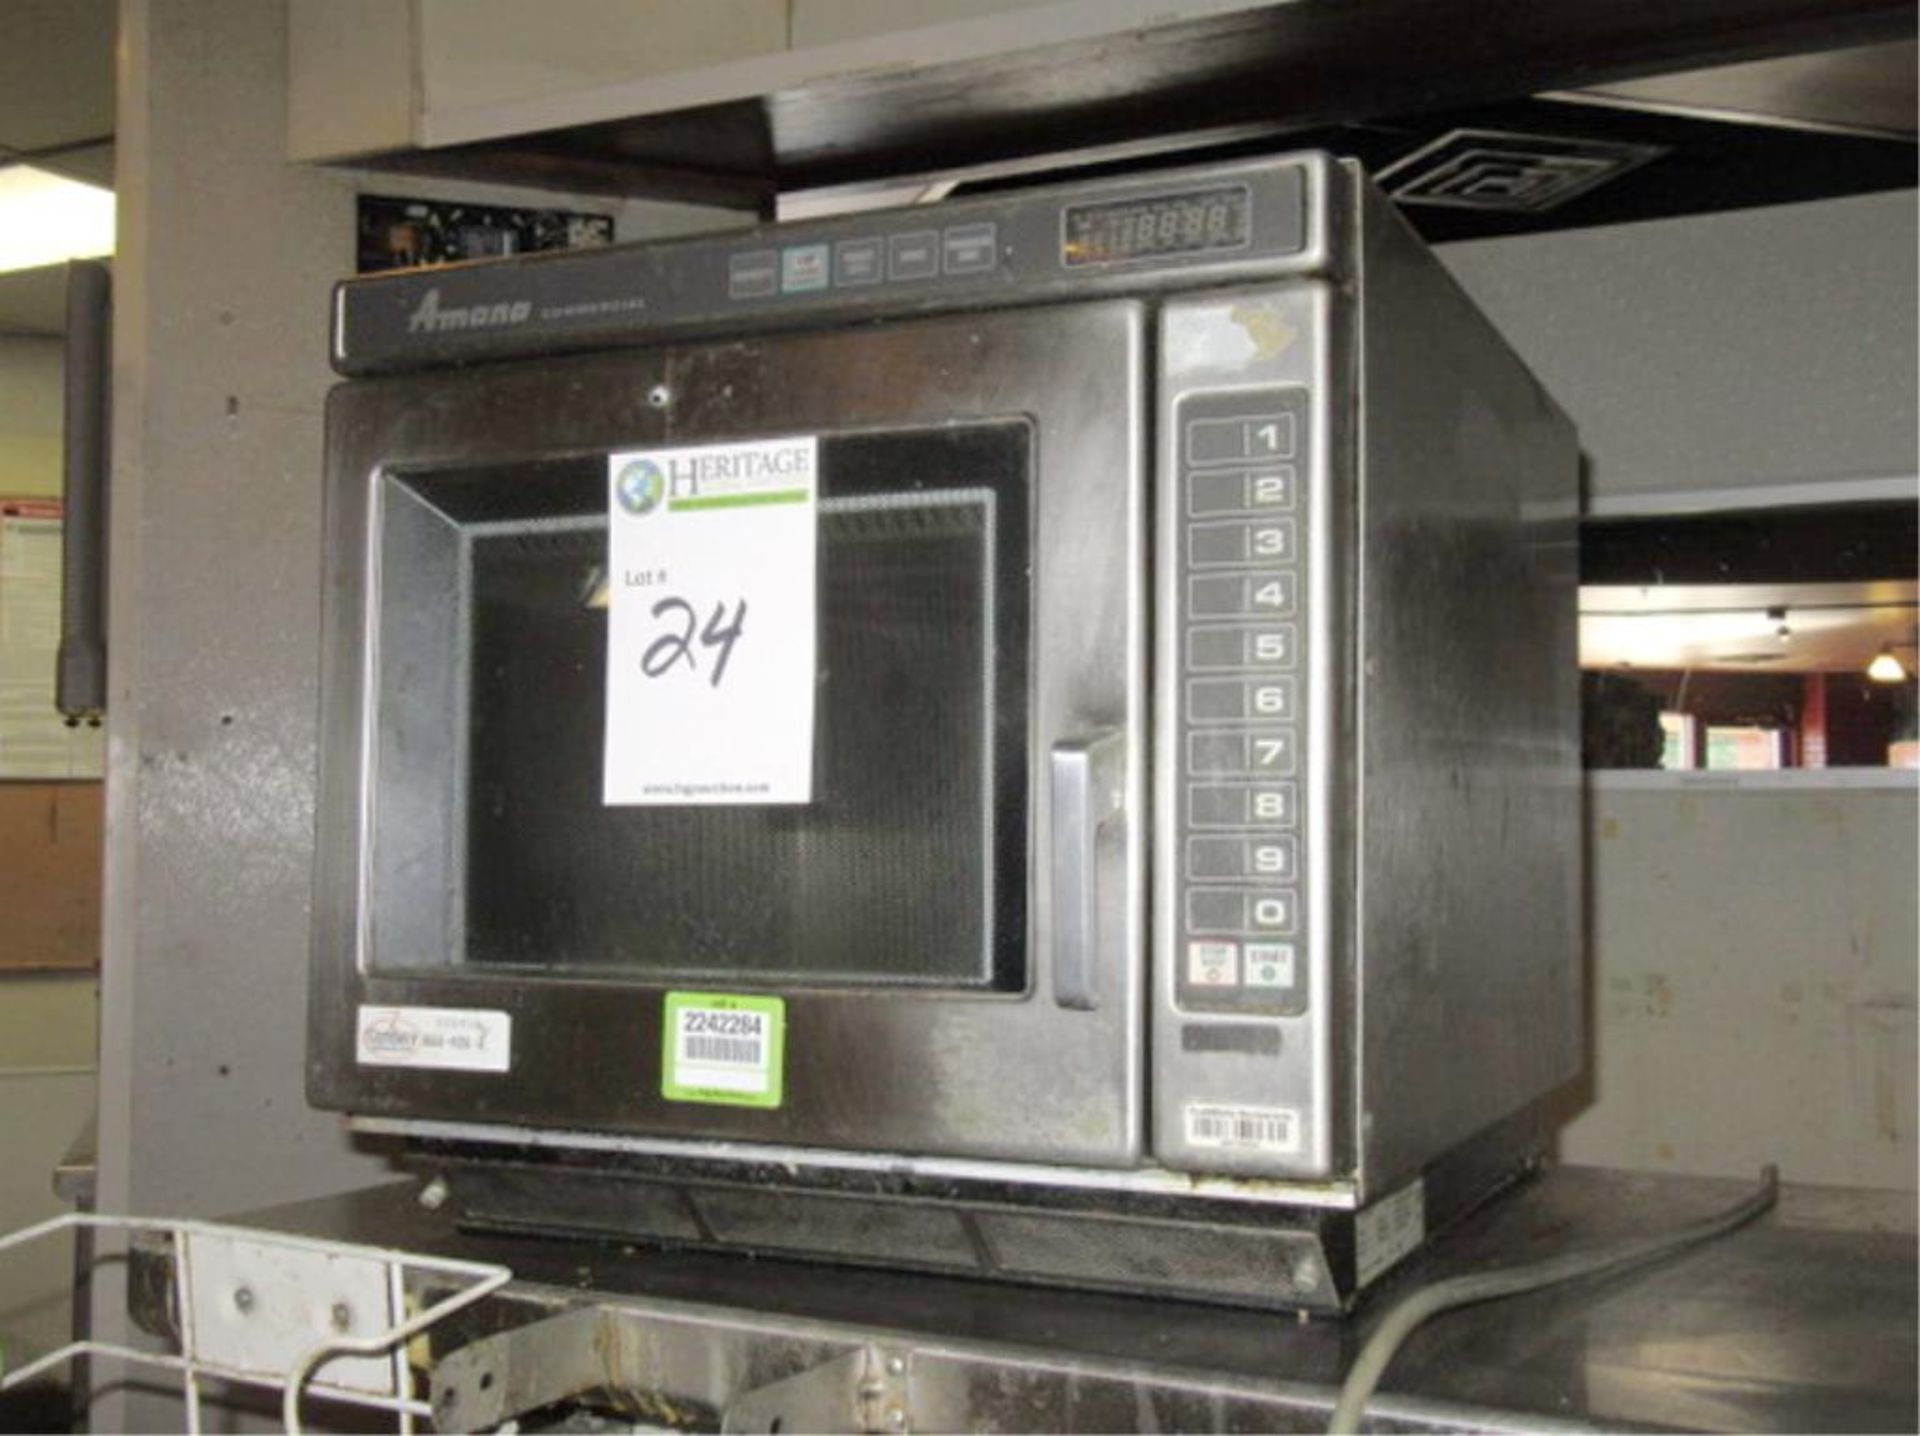 Microwave Oven - Image 2 of 4